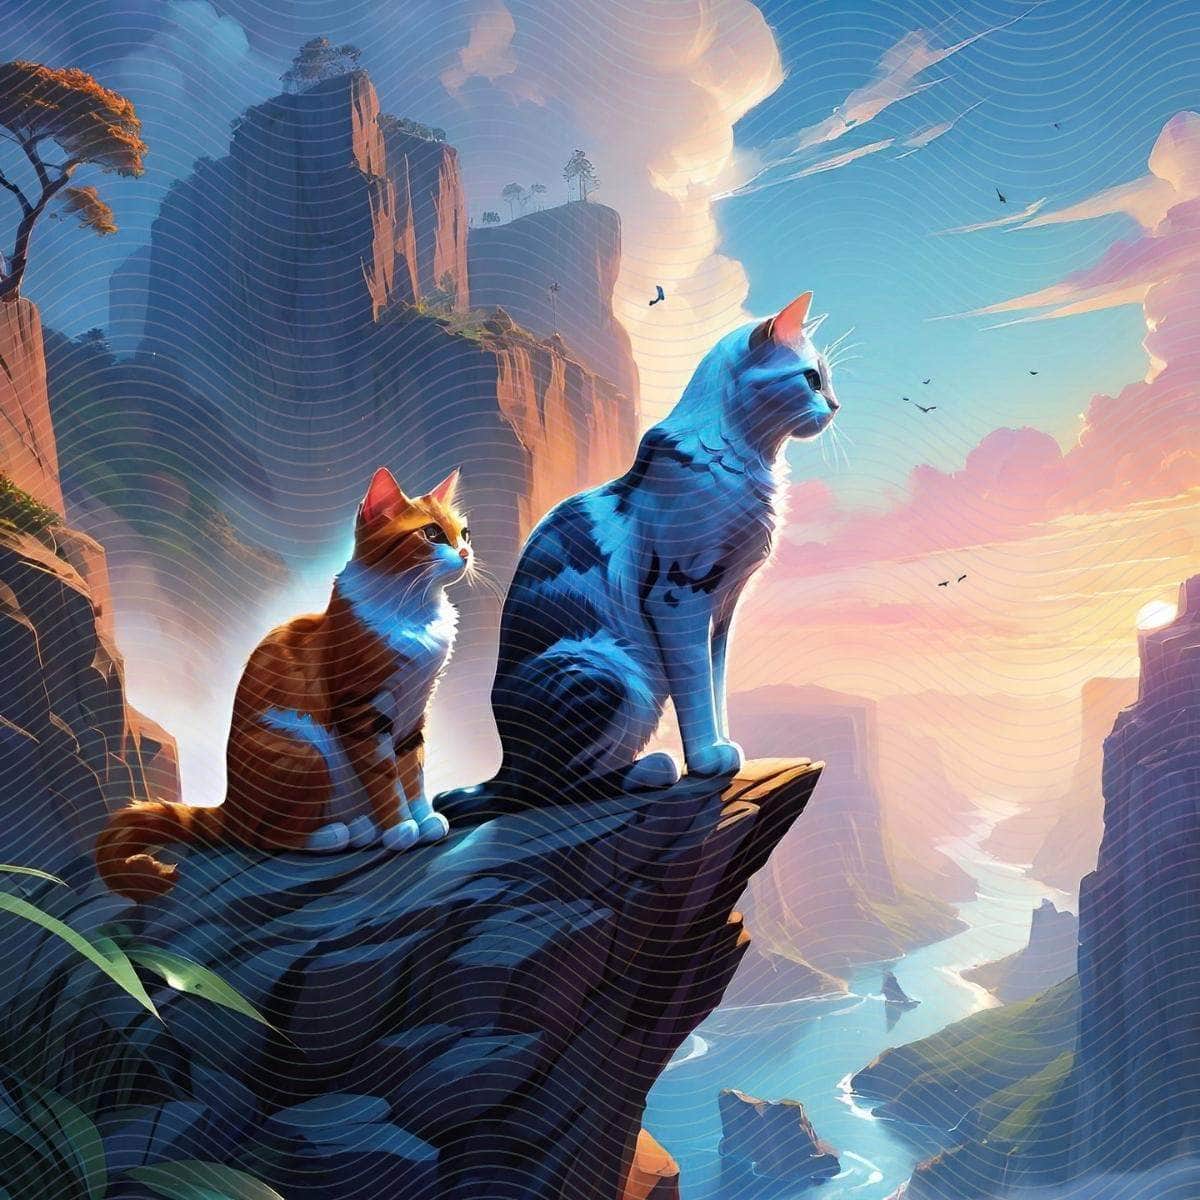 Two Beautiful Cats Sitting On a Cliff